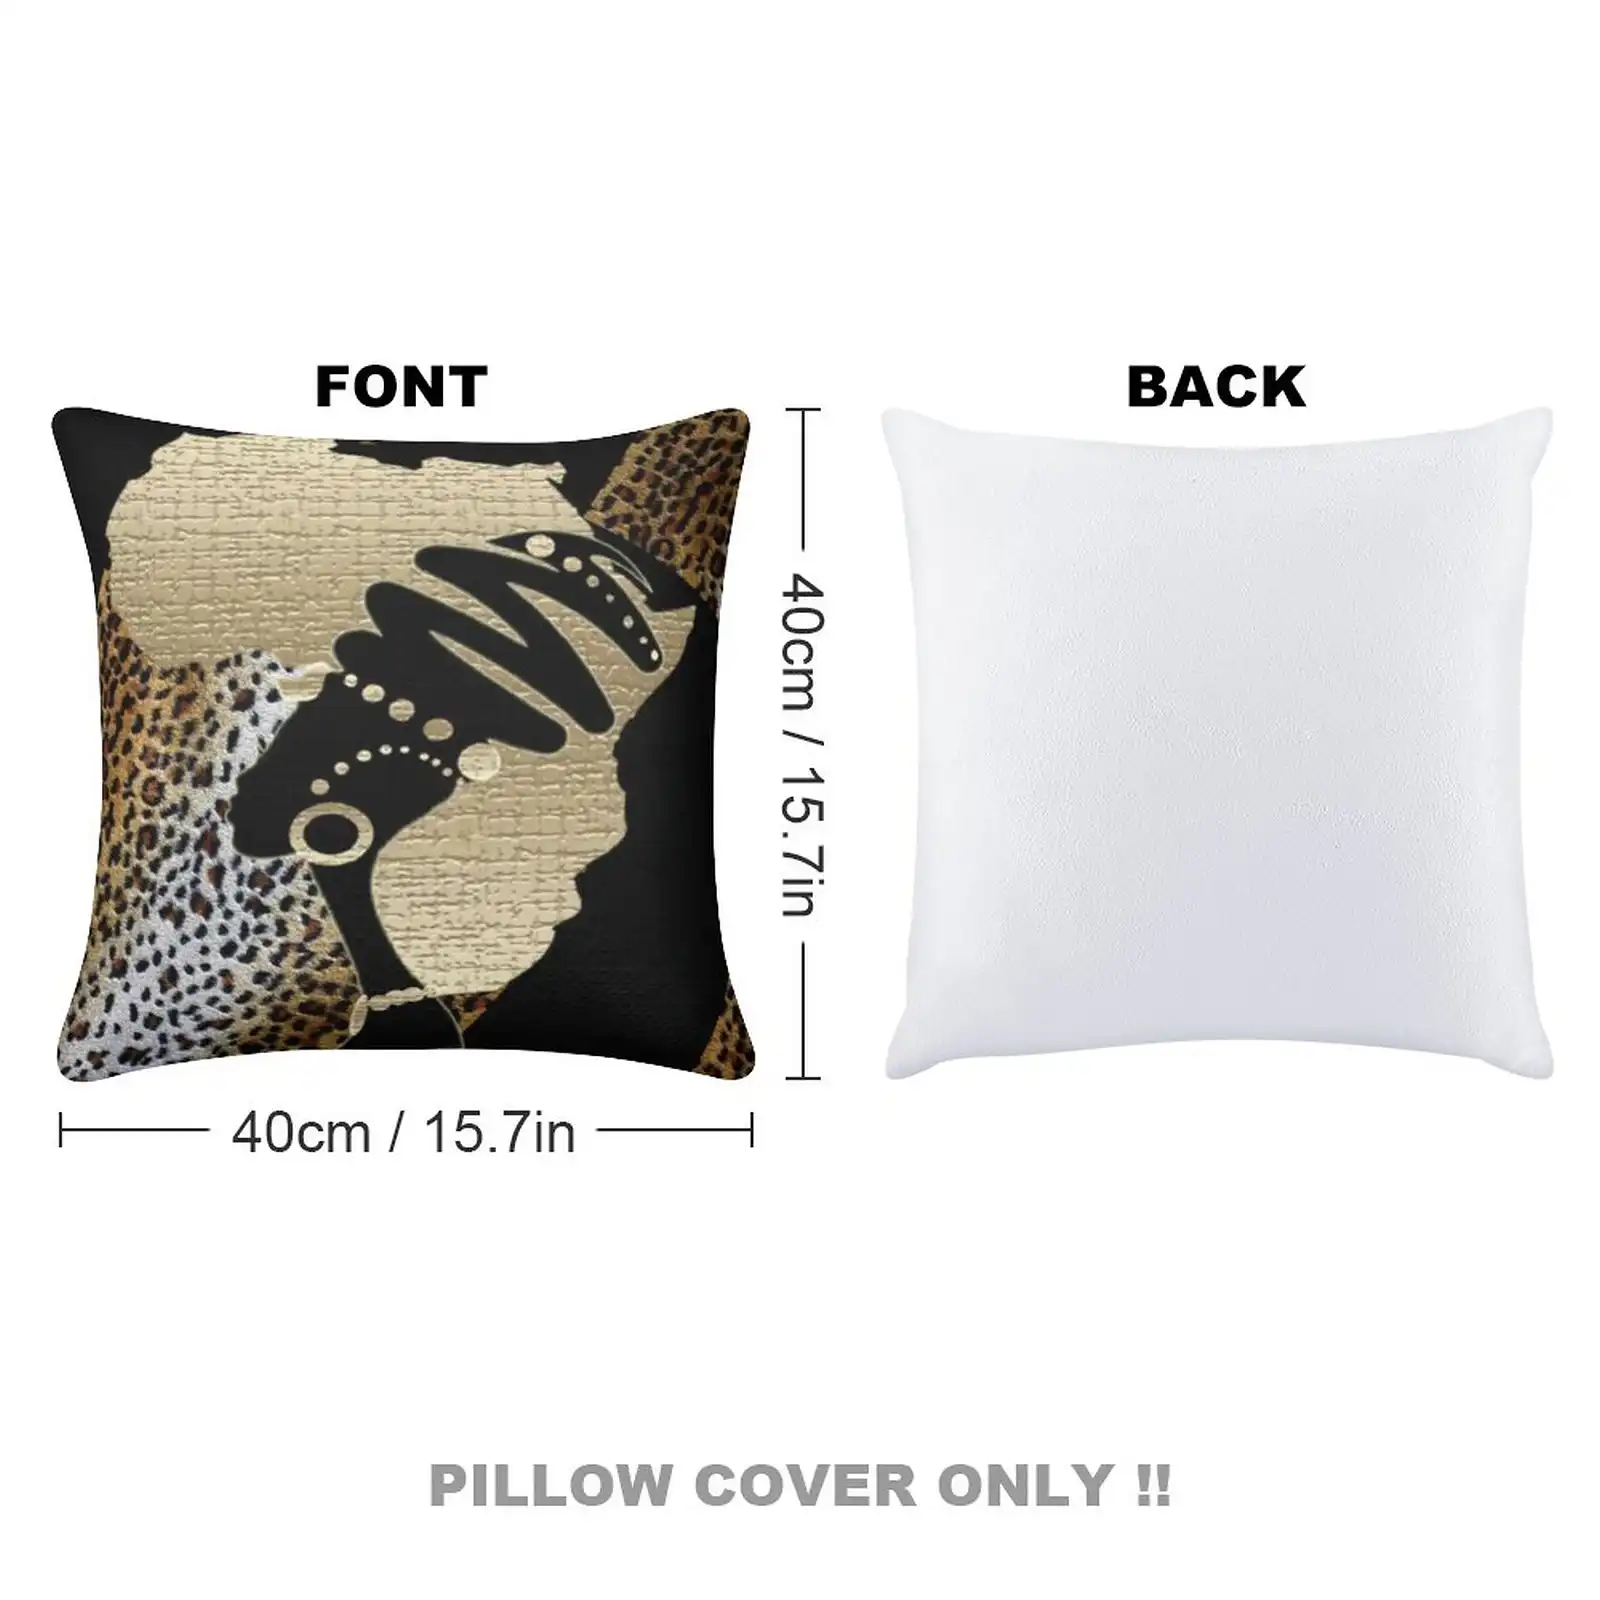 Africa In Gold, A Logo Of A African Princess Throw Pillow case